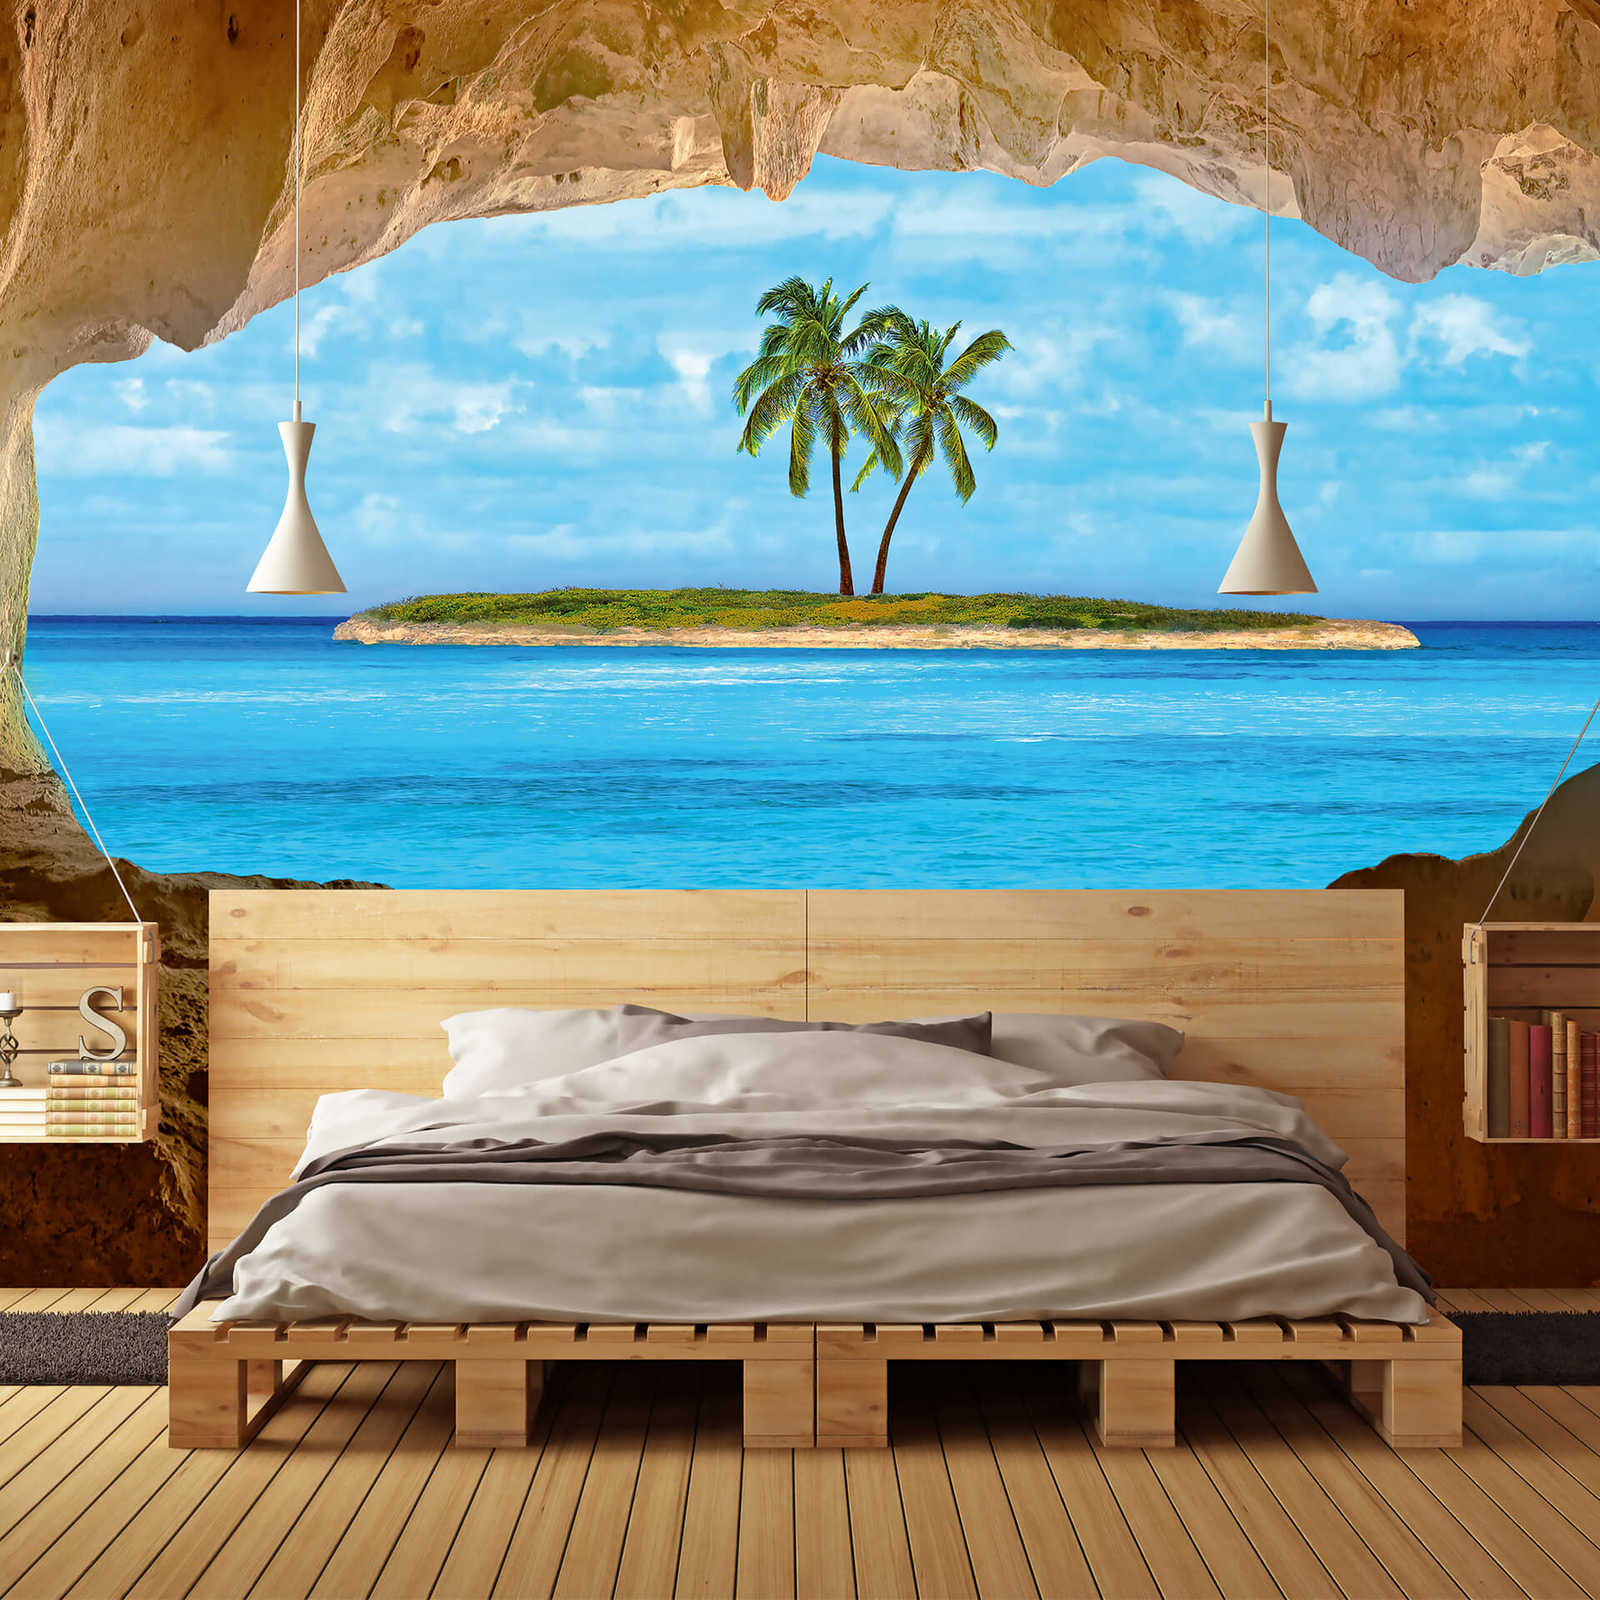             Tropical mural with palm island & south seas view
        